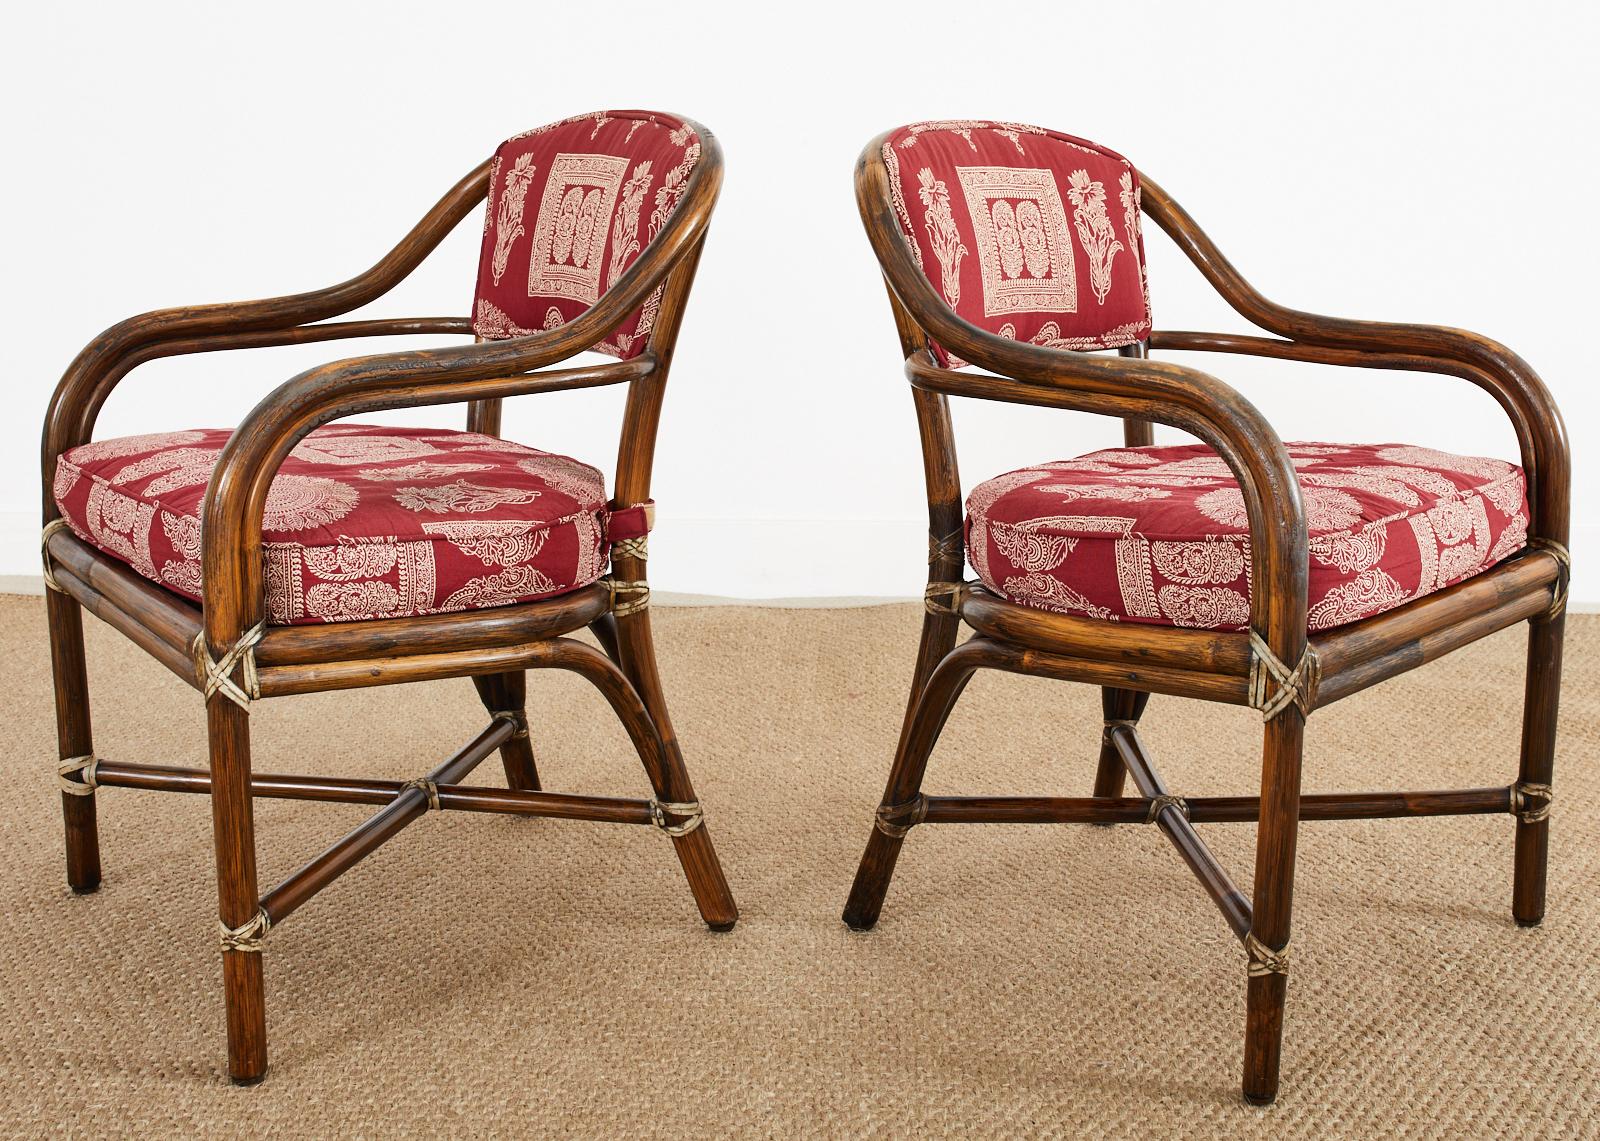 Hand-Crafted Pair of McGuire Armchairs with Rajasthan Style Upholstery